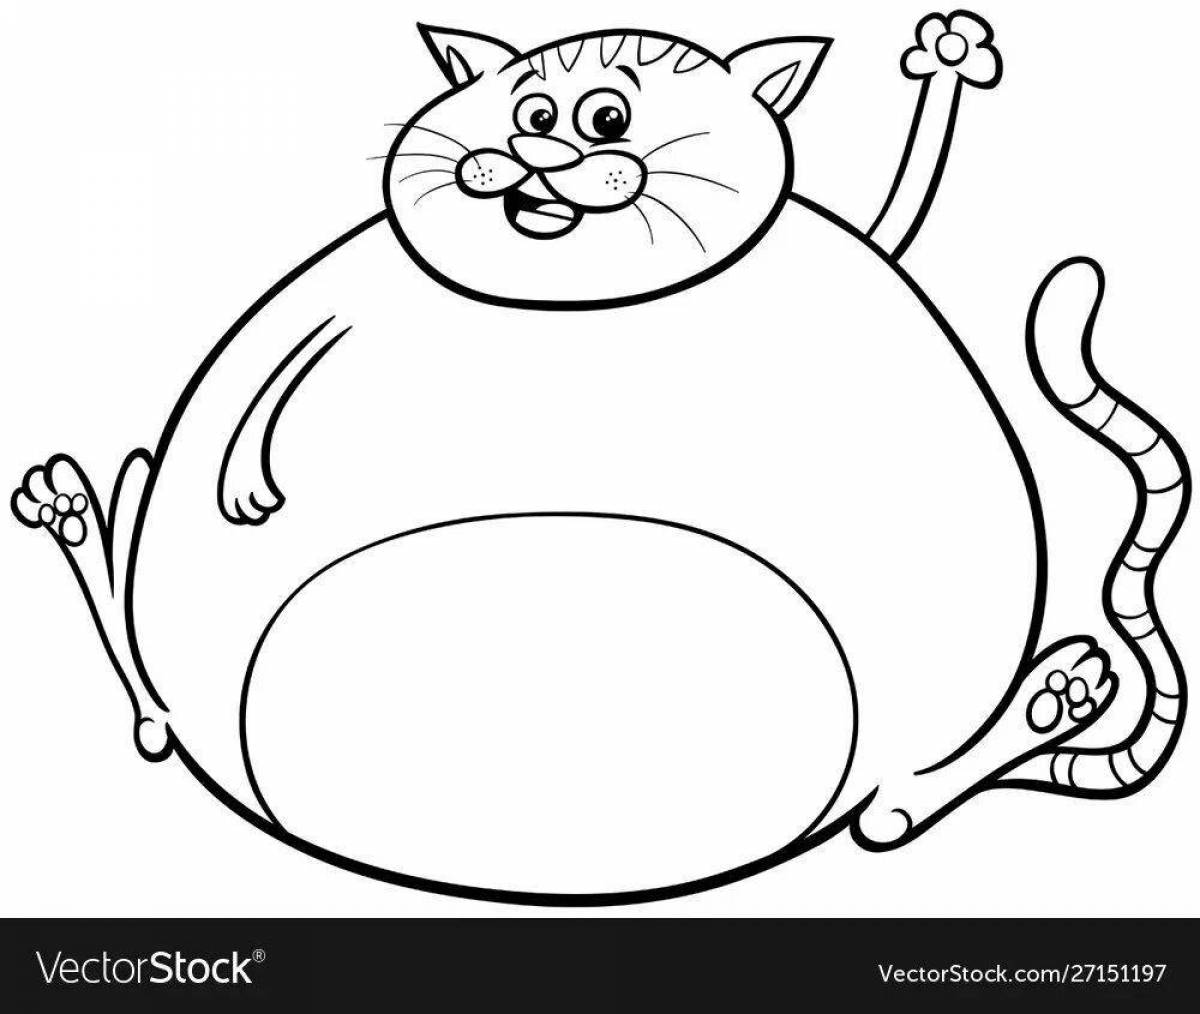 Coloring book happy chubby cat